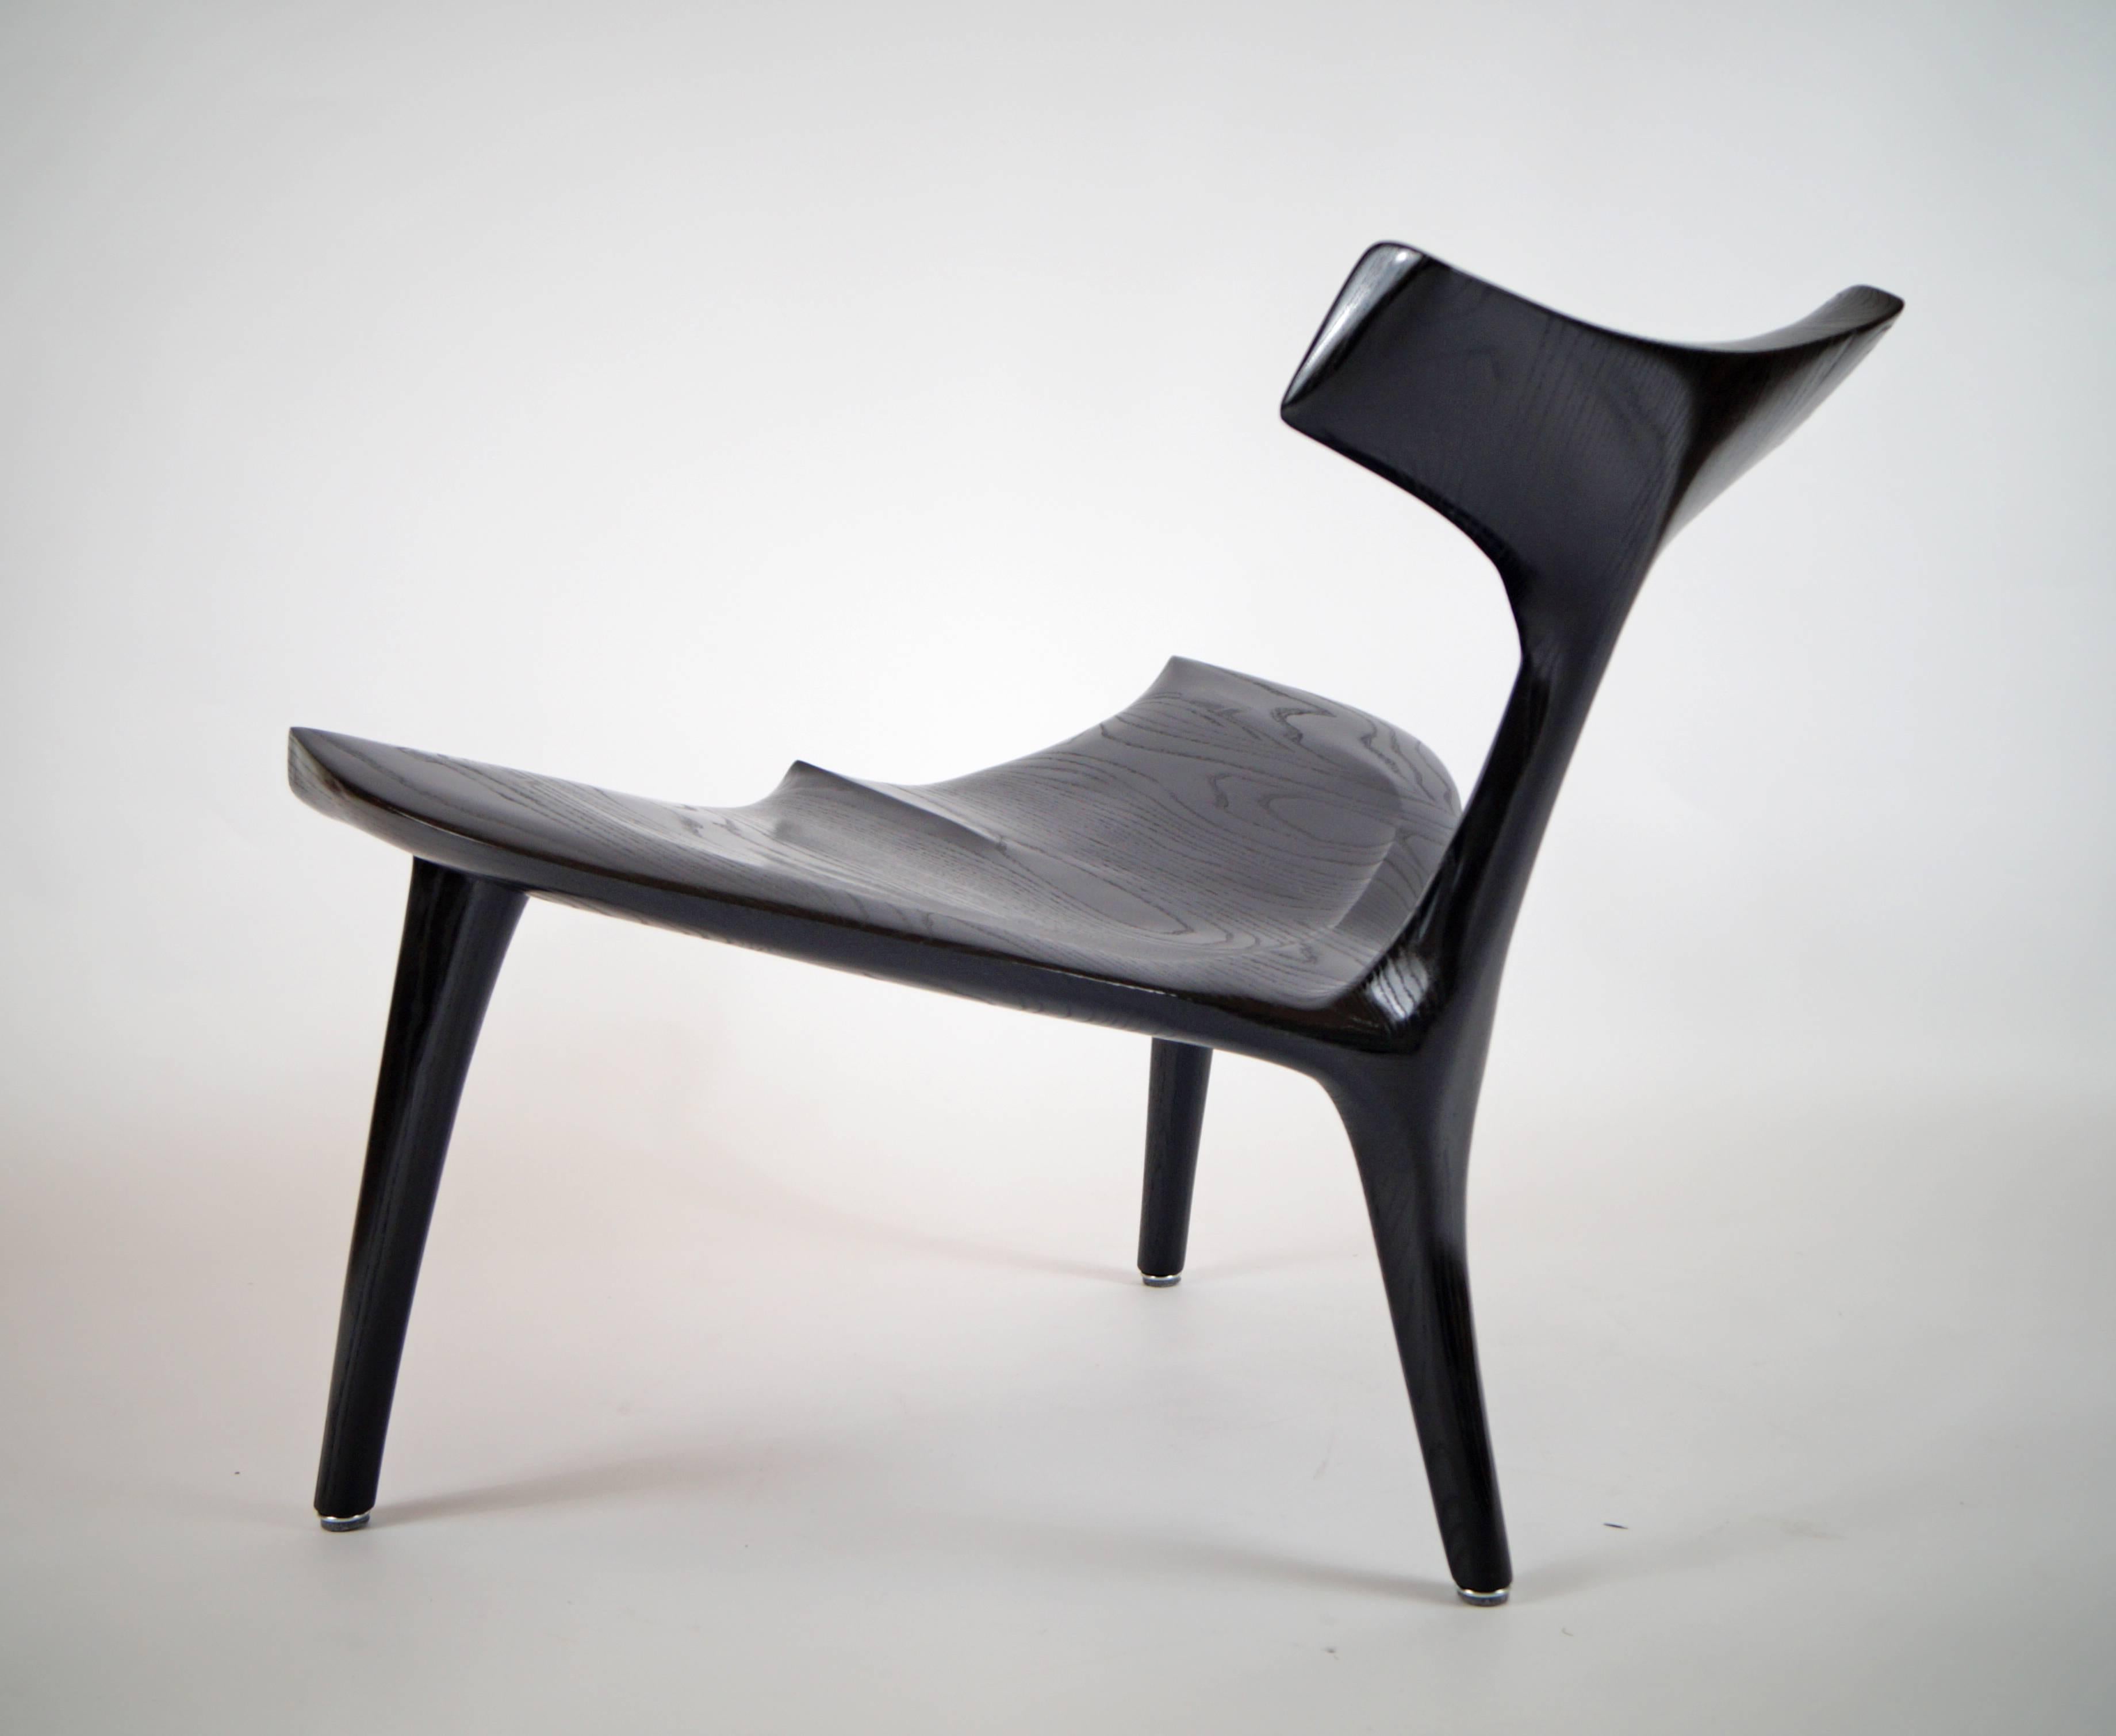 Whale chair MS82, handcrafted and designed by Morten Stenbaek
Artist: Morten Stenbaek
Signed
Material: Ash finish: Indian ink og lak
Dimensions: 67 x 76 x 67 (Seat height: 39 cm)

When Morten Stenbæk enters his workshop, his thoughts and all